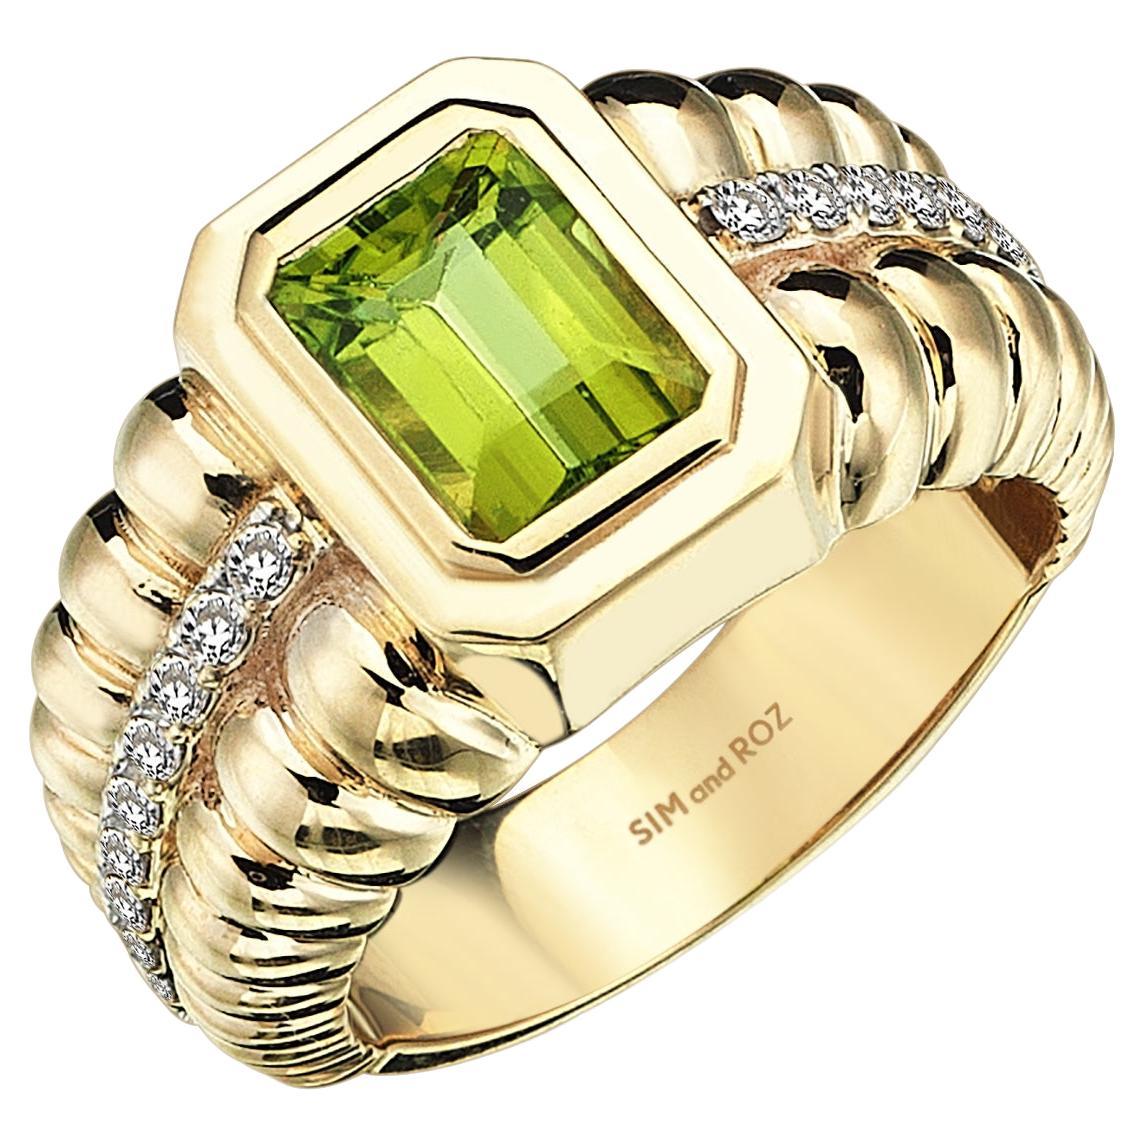 SIM and ROZ 18K Yellow Gold Ring with Round Cut Diamonds and Emerald Cut Peridot